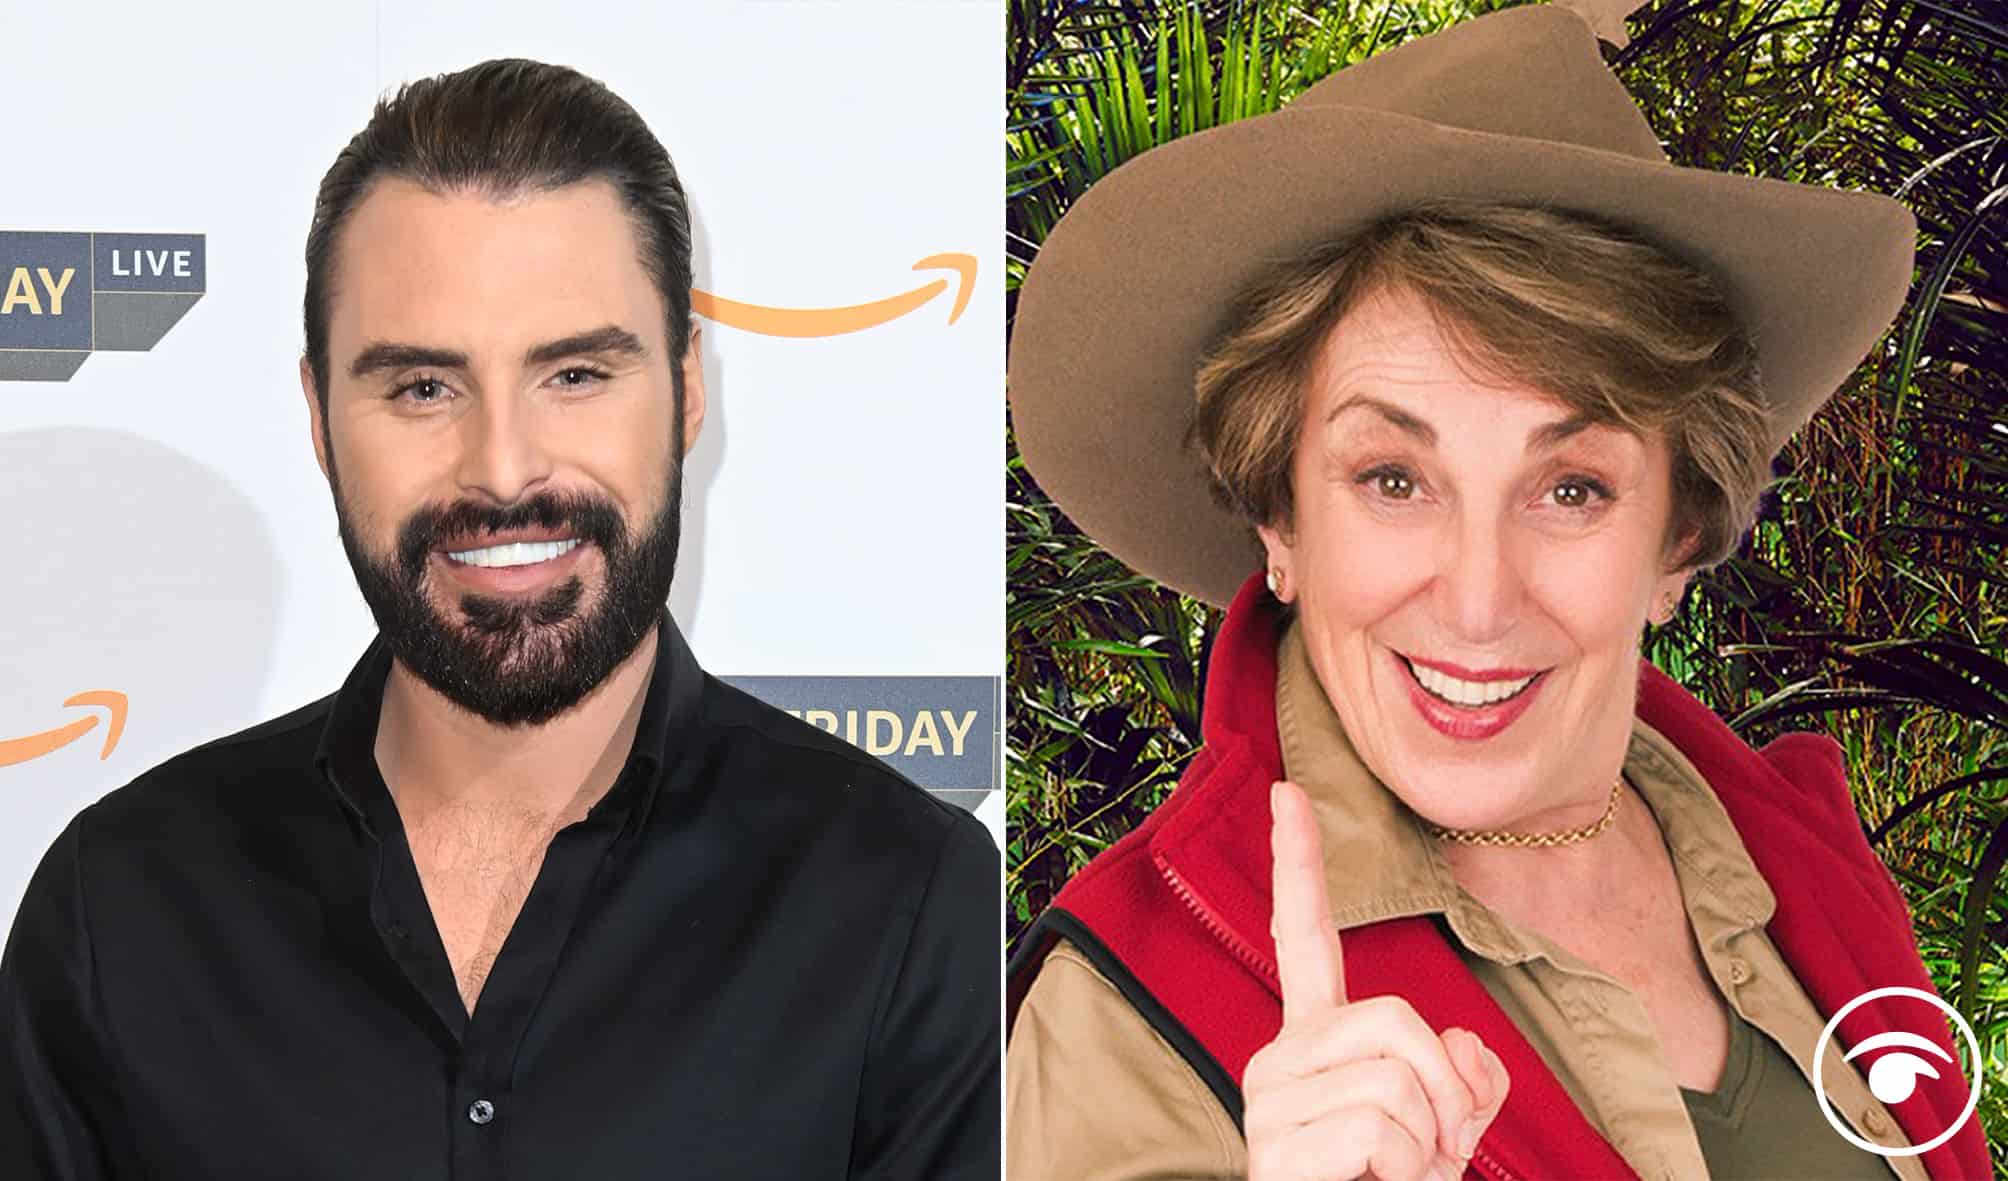 Things you never thought you’d see! Edwina Currie owned by Rylan Clark over Partygate